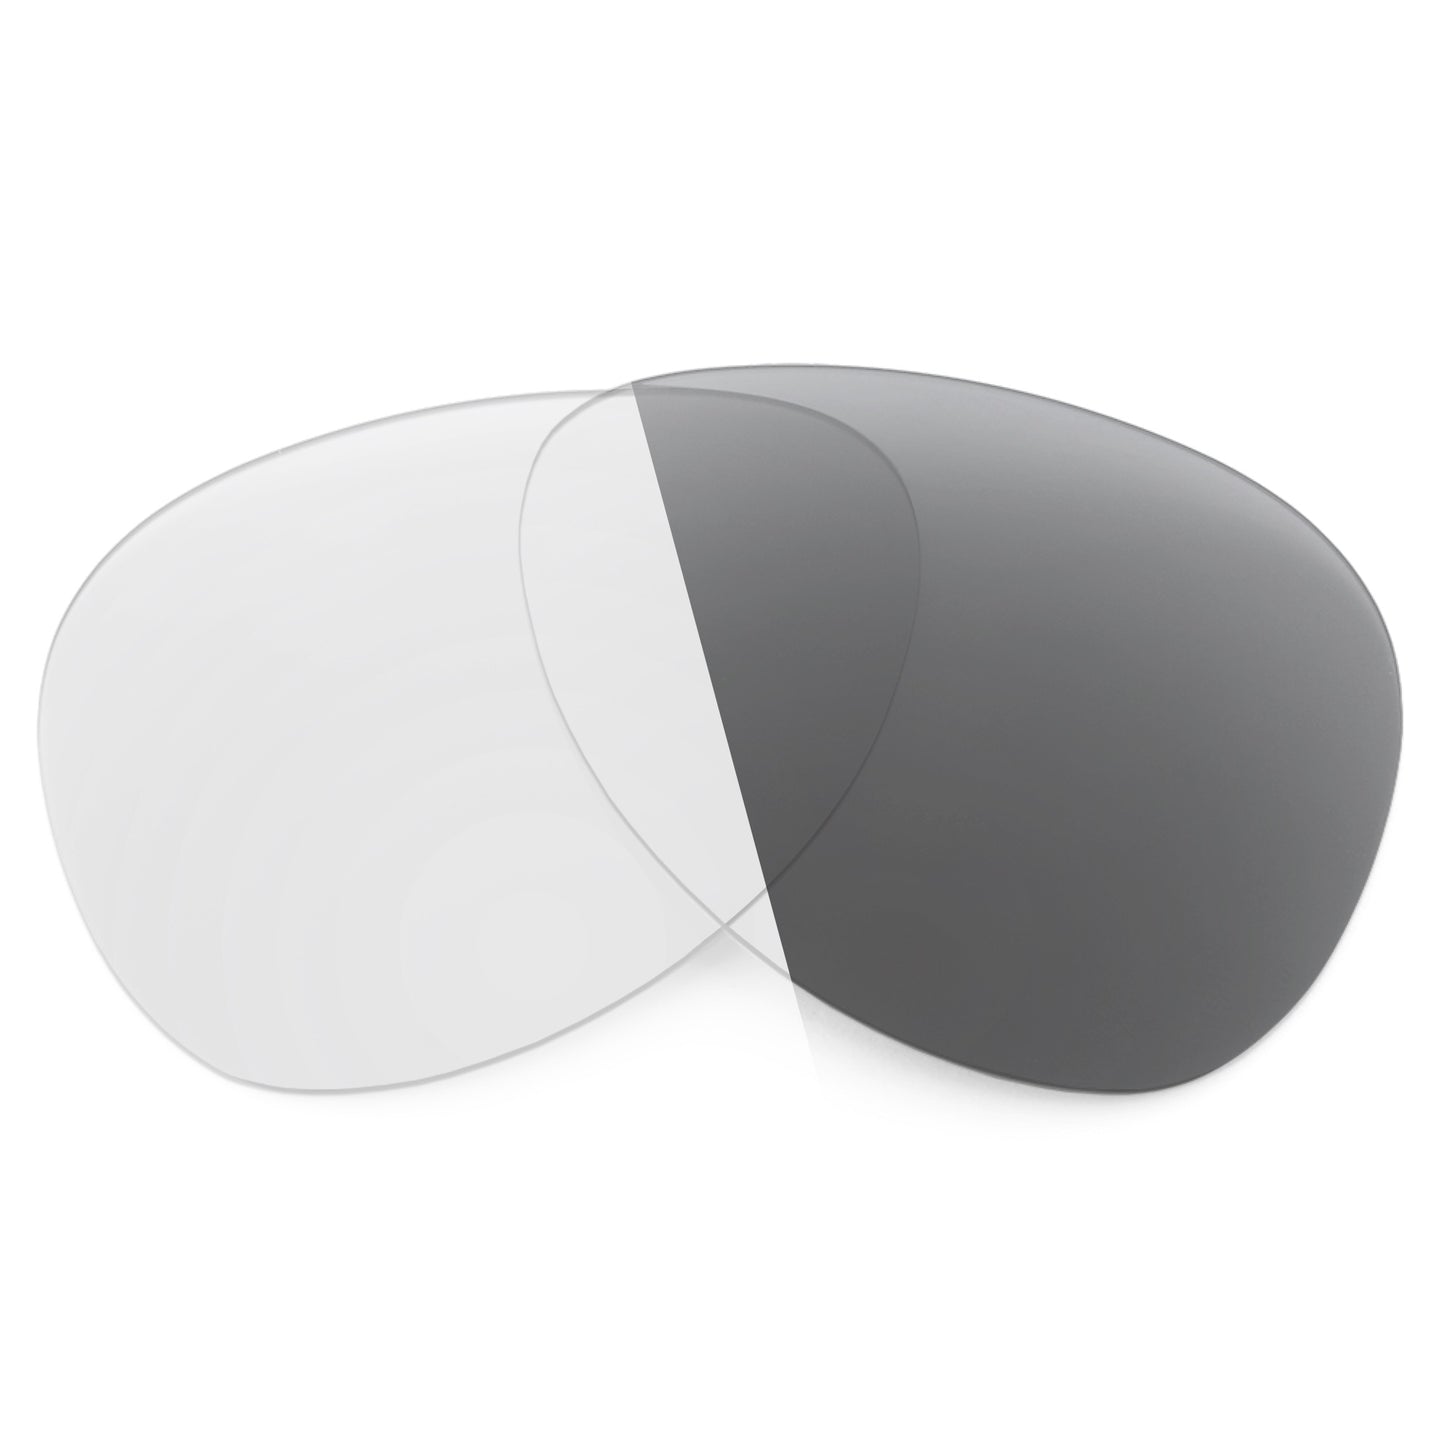 Revant replacement lenses for Ray-Ban RB8064 Titanium 53mm Non-Polarized Adapt Gray Photochromic